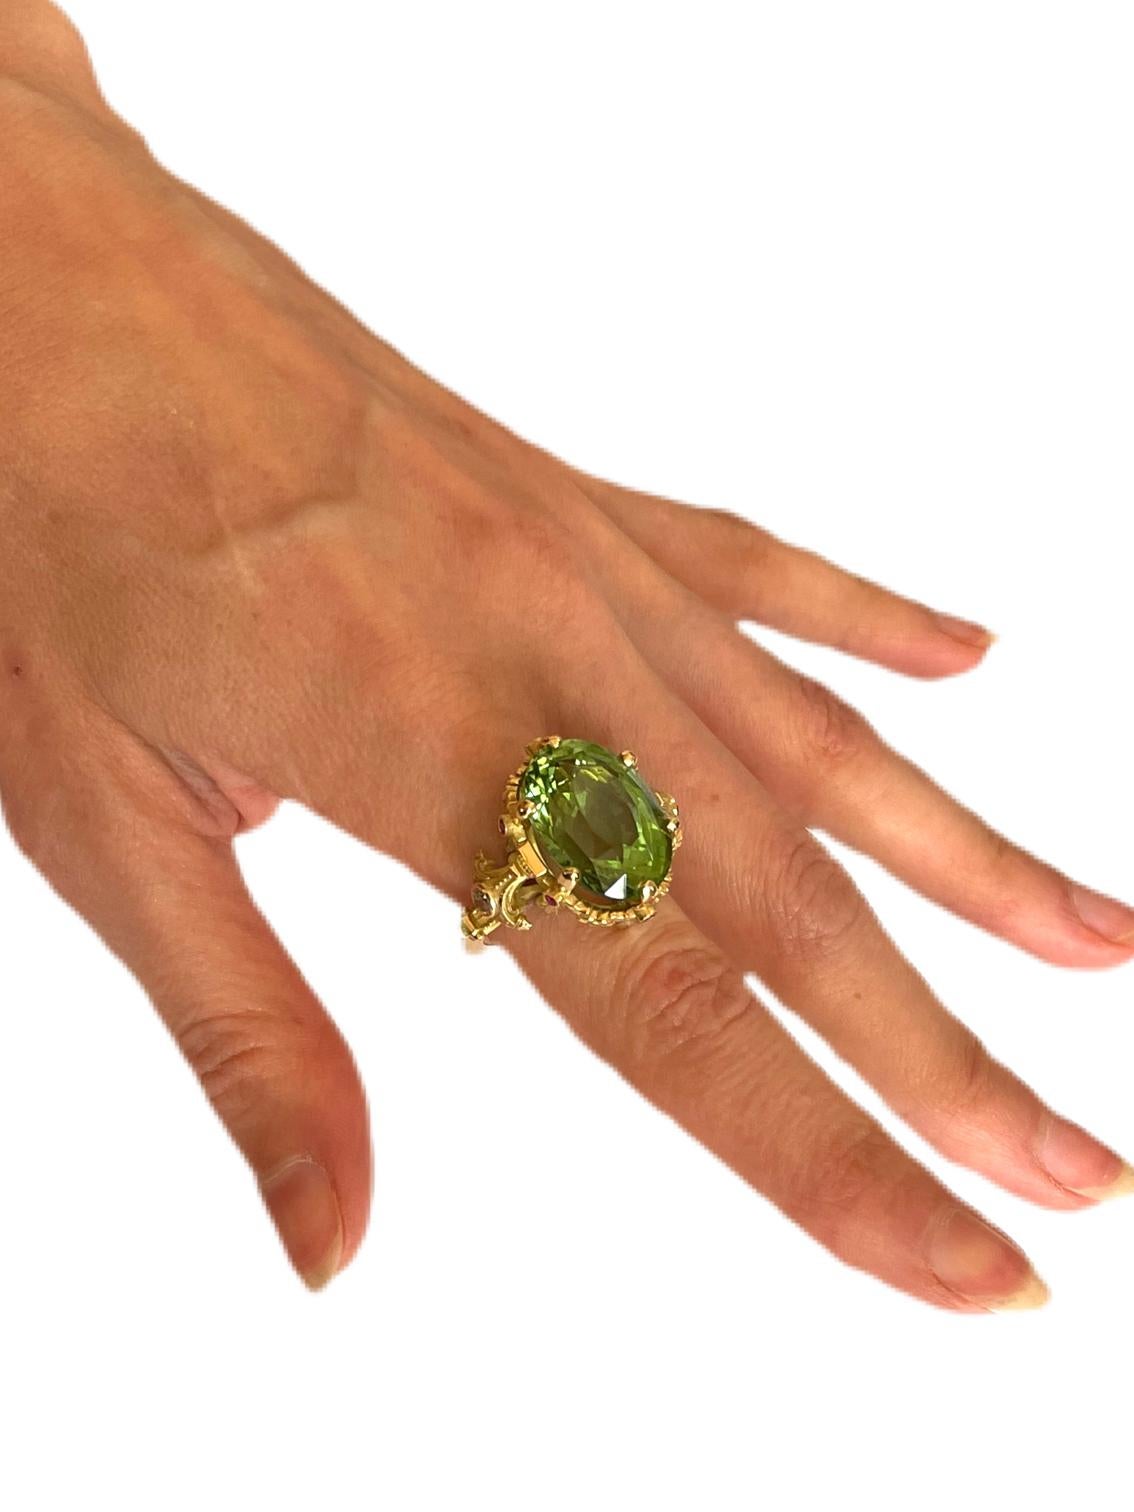 21ct Green Tourmaline, Rubies, Diamonds, & 18k Yellow Gold Antique Style Ring In New Condition For Sale In Melbourne, Vic